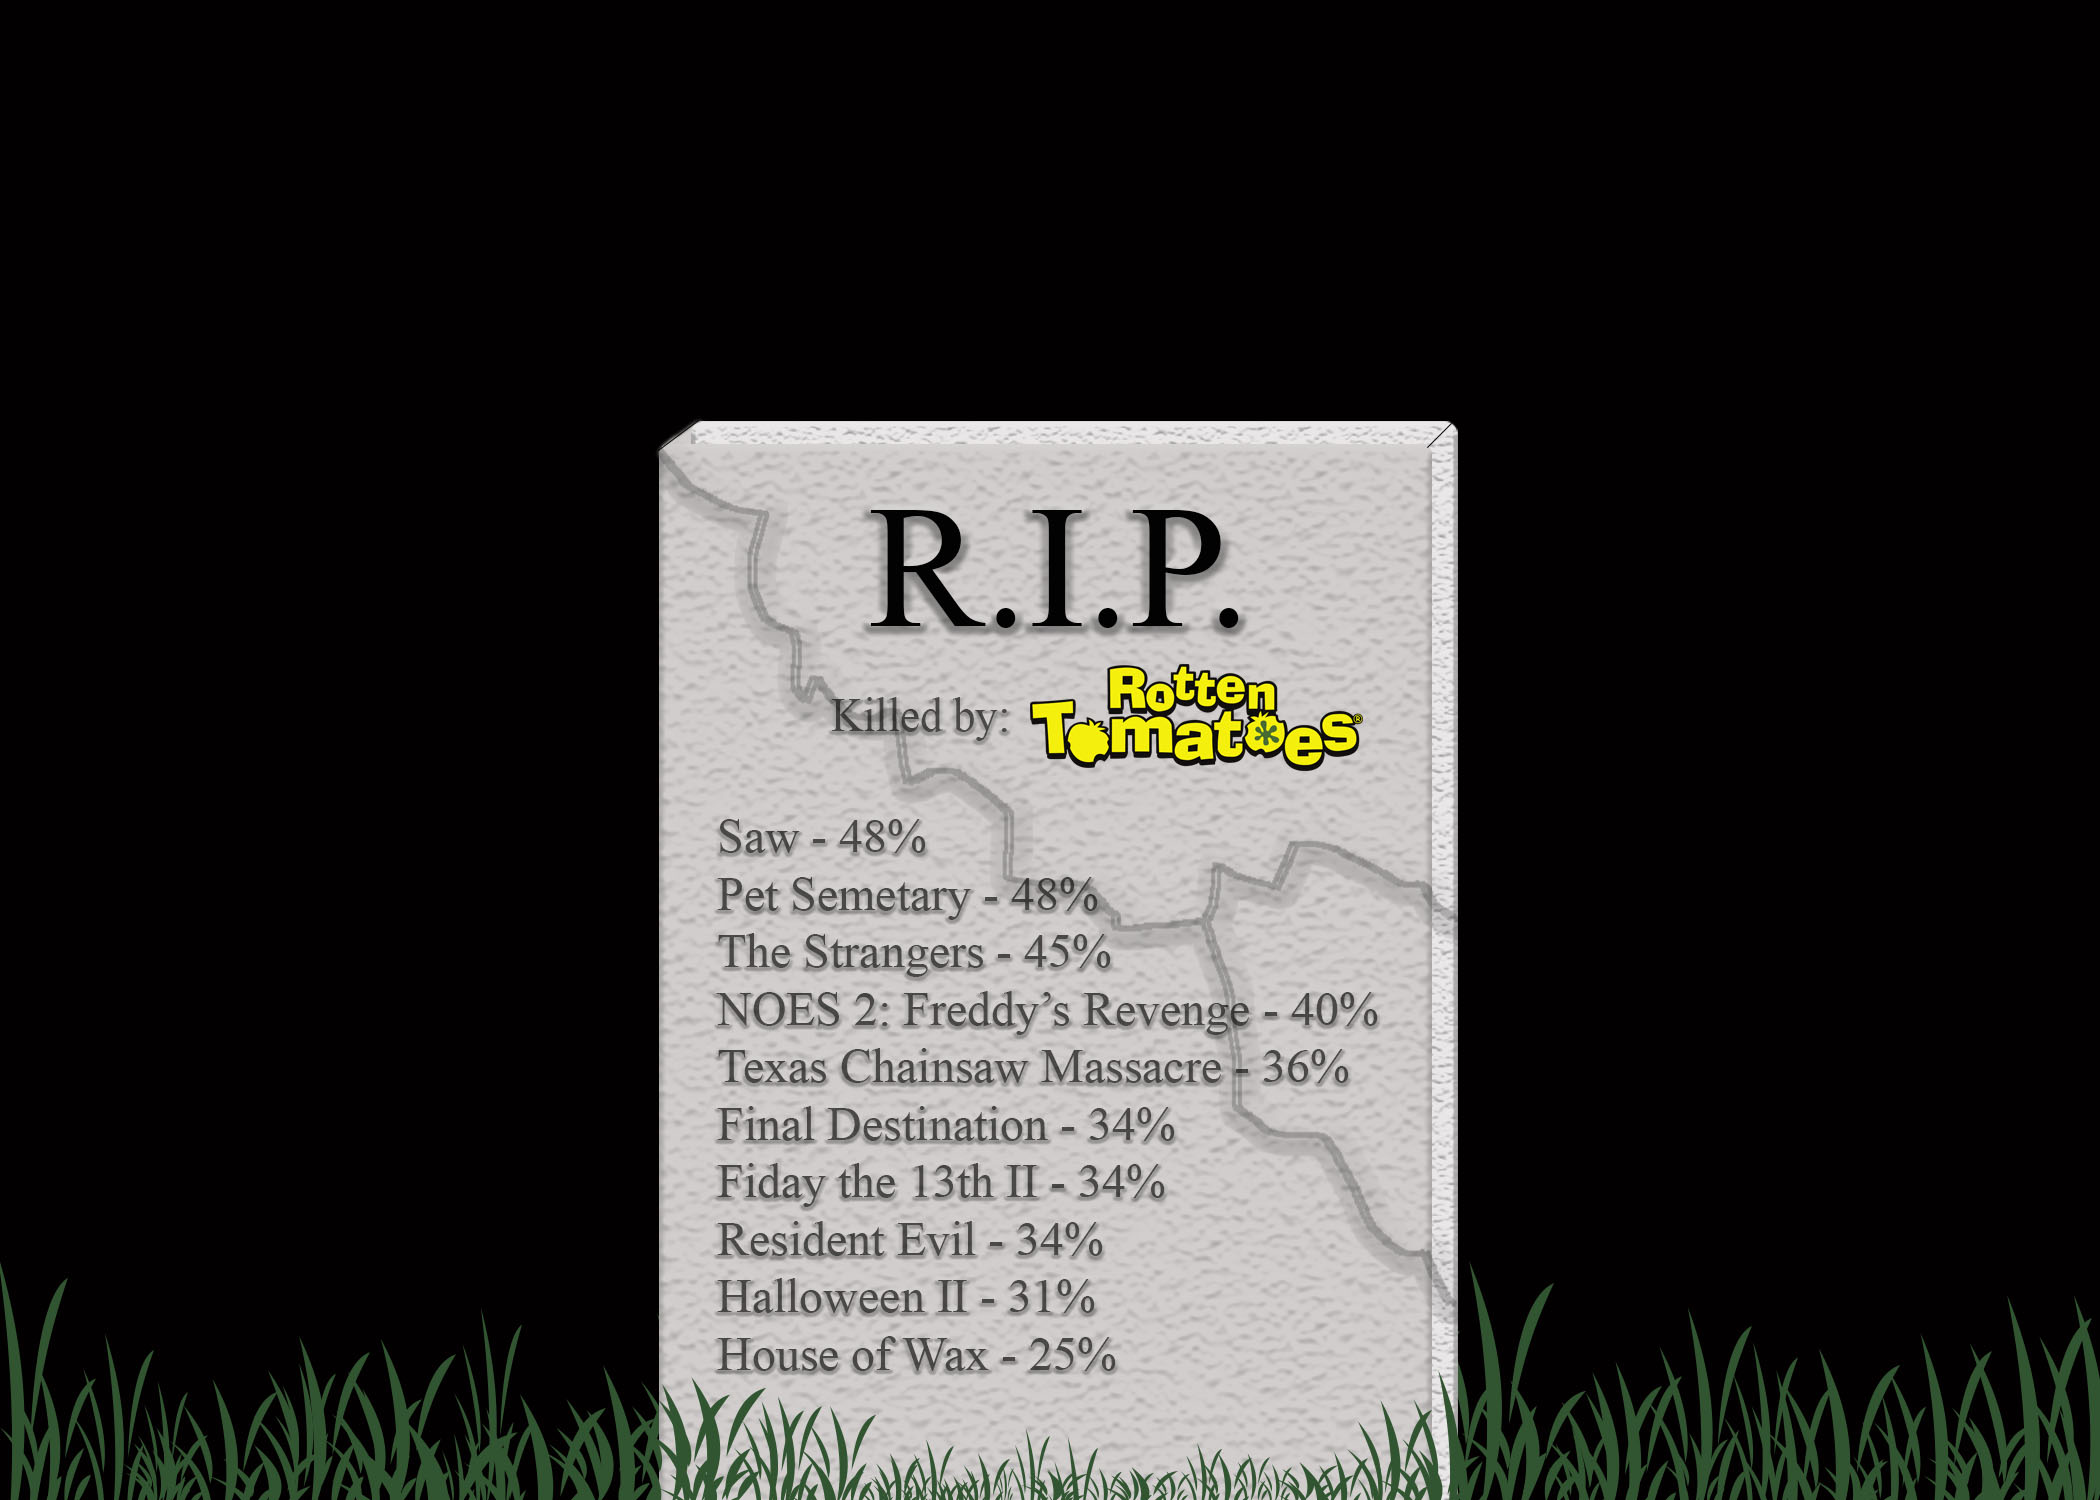 Graphic: Tombstone depicting poorly reviewed horror movies by RottenTomatoes that are actually good. Graphic created by Signal reporter Joseph Cabrera.